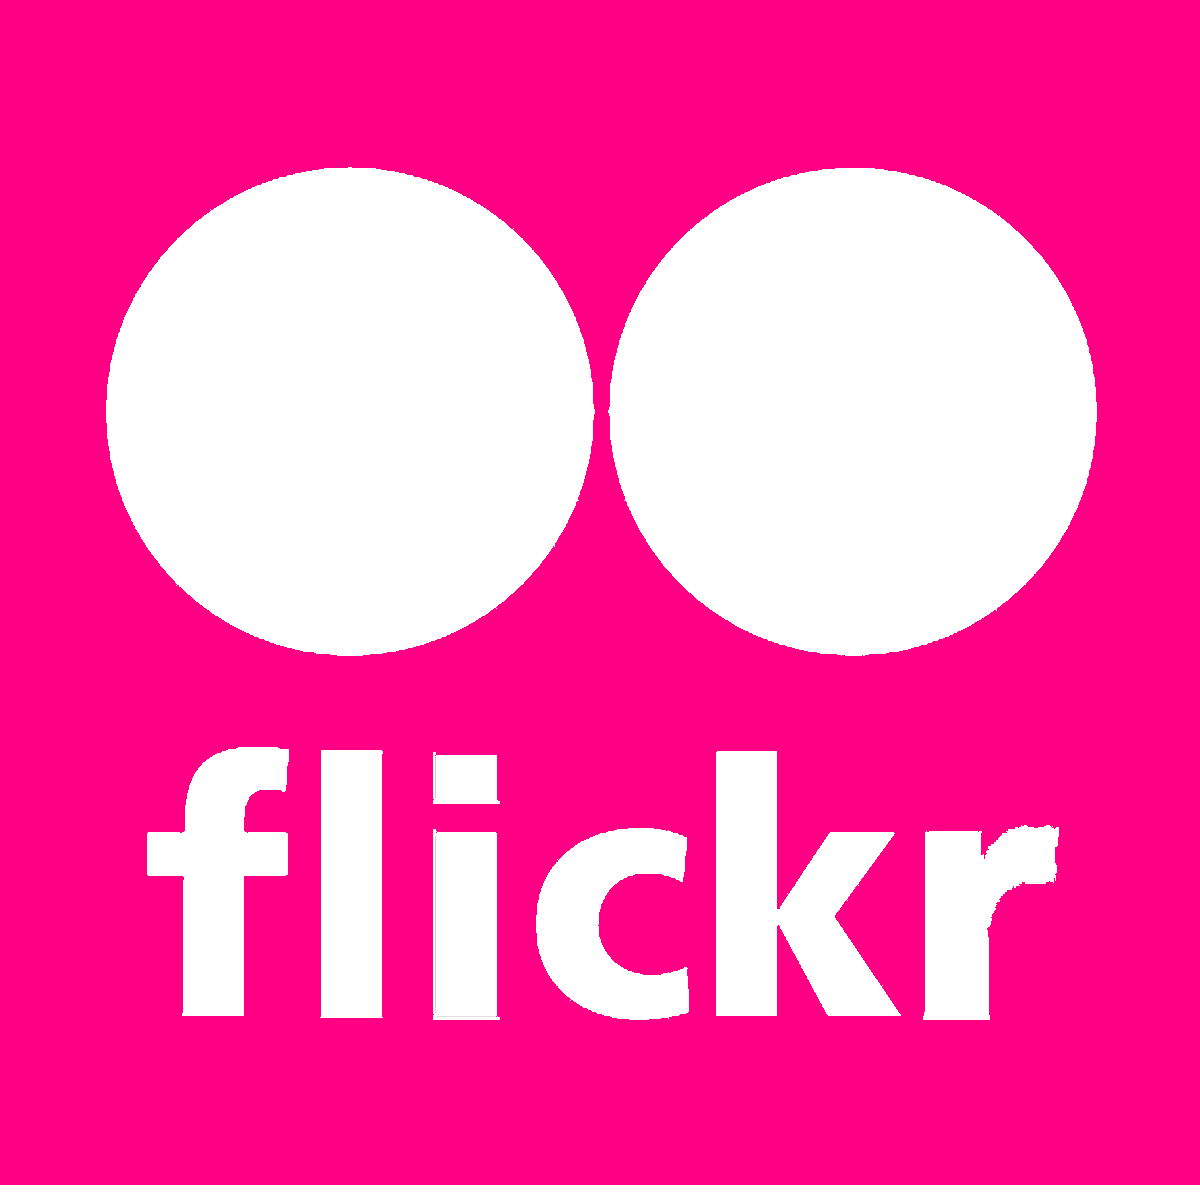 Flickr Logo - High quality Flickr Logo Cliparts For Free! #8775 - Free Icons and ...